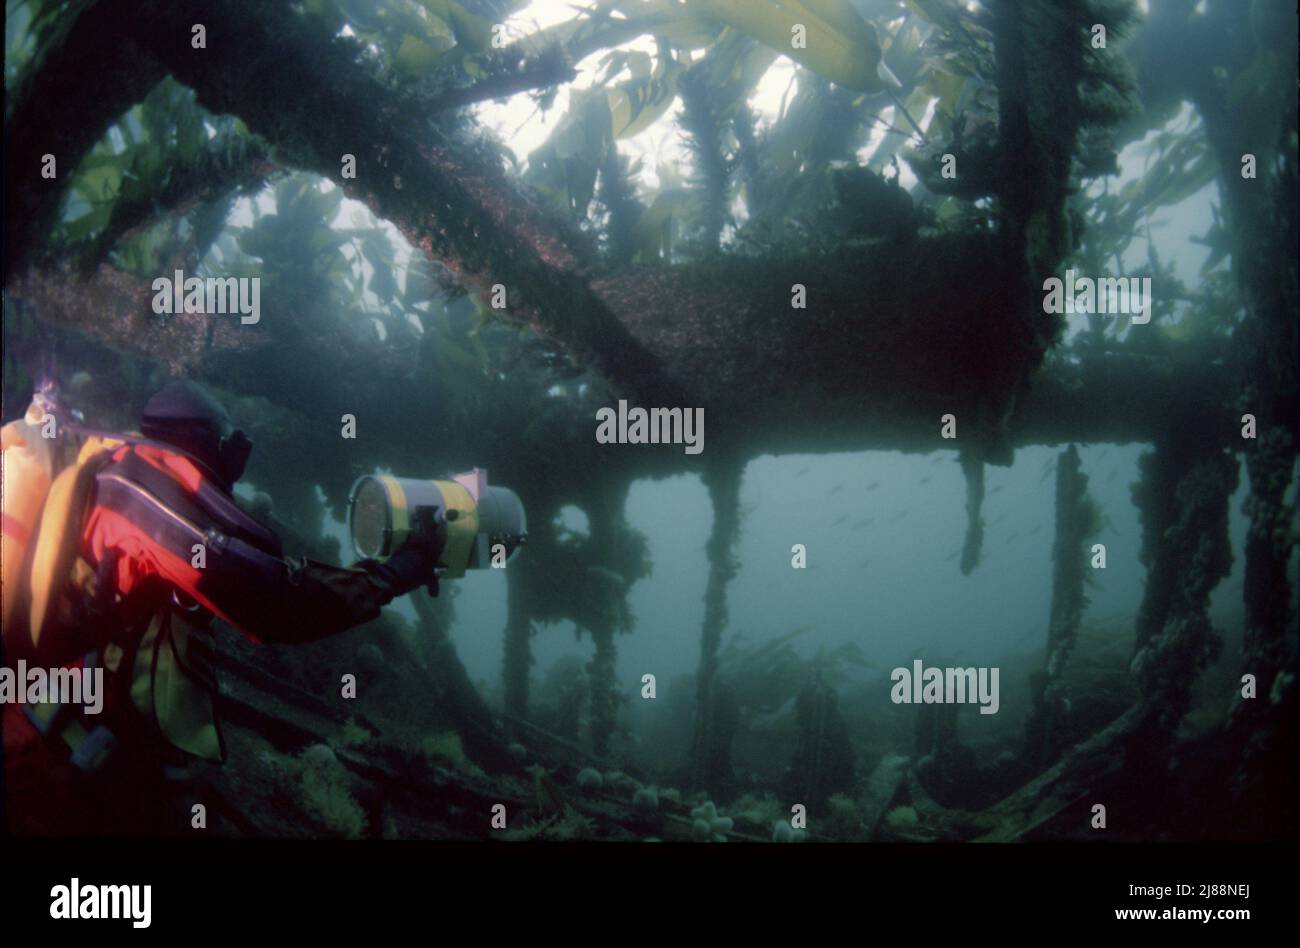 Diver inside the sunken Block Ships, Orkney Isles, Was attempting to protect Scapa flow during the Second World War. Some are very scenic. Stock Photo